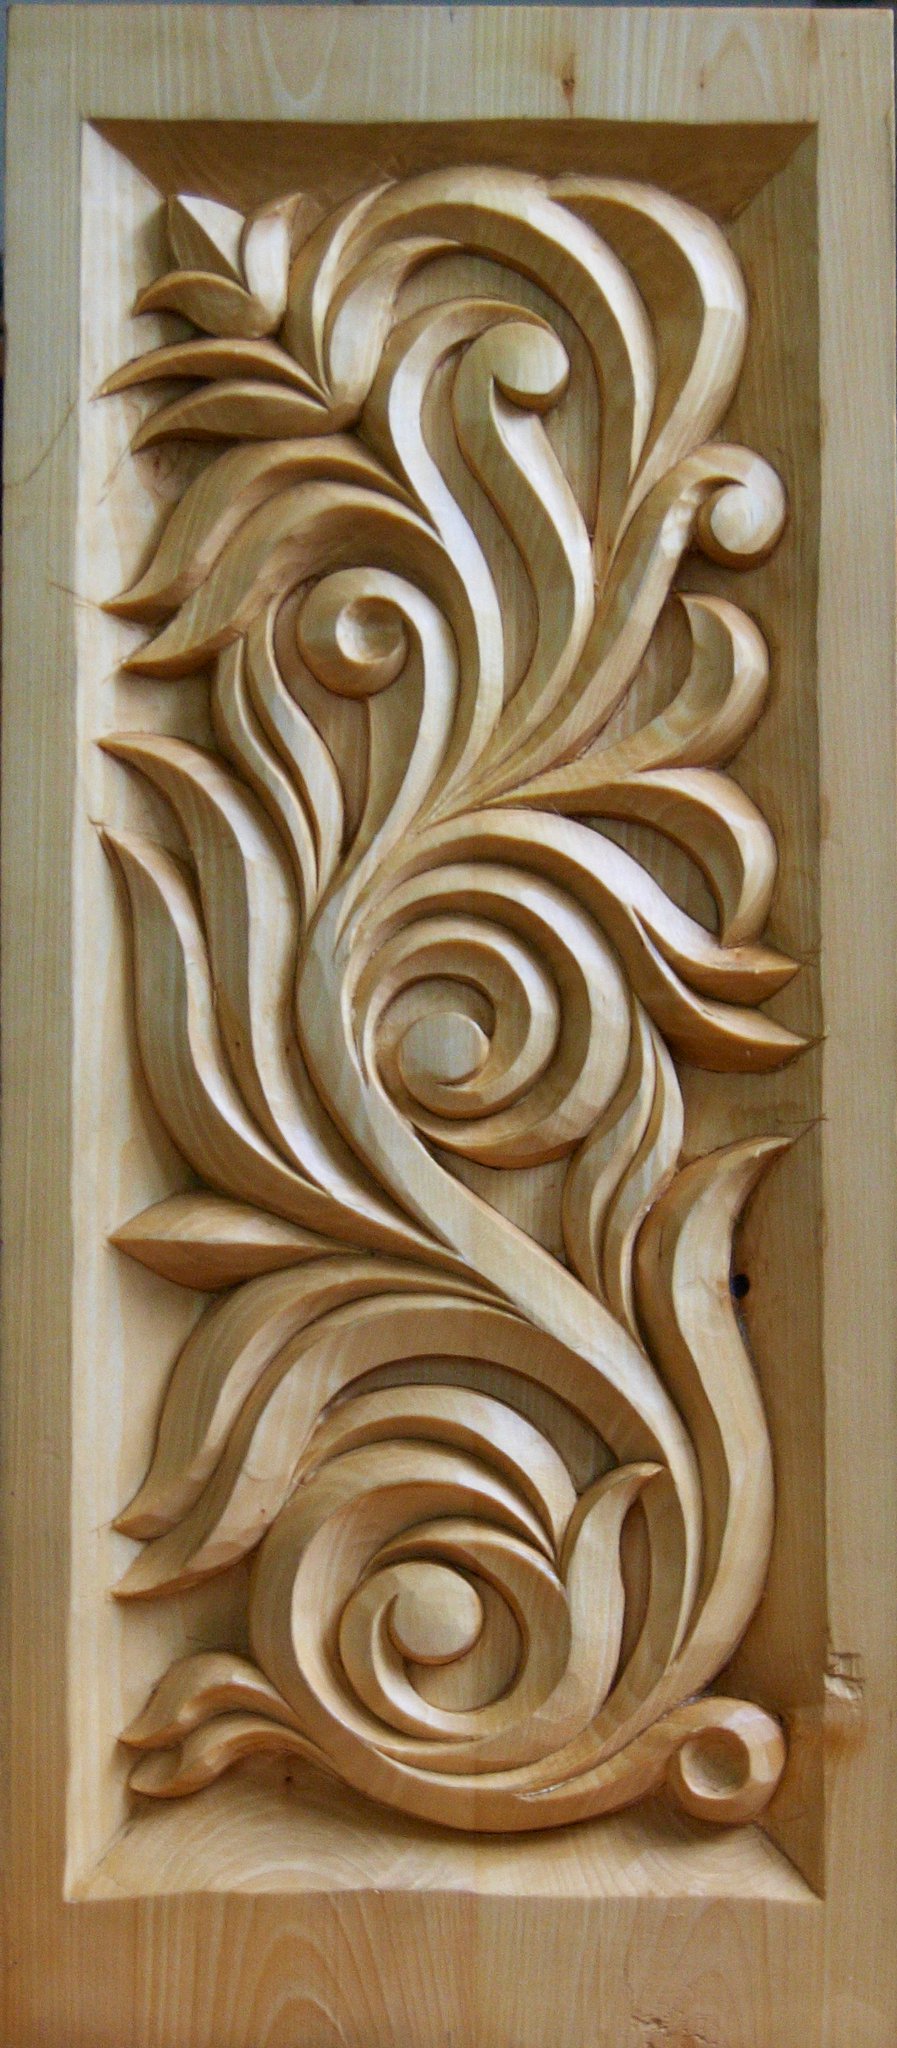  wood carving designs for free